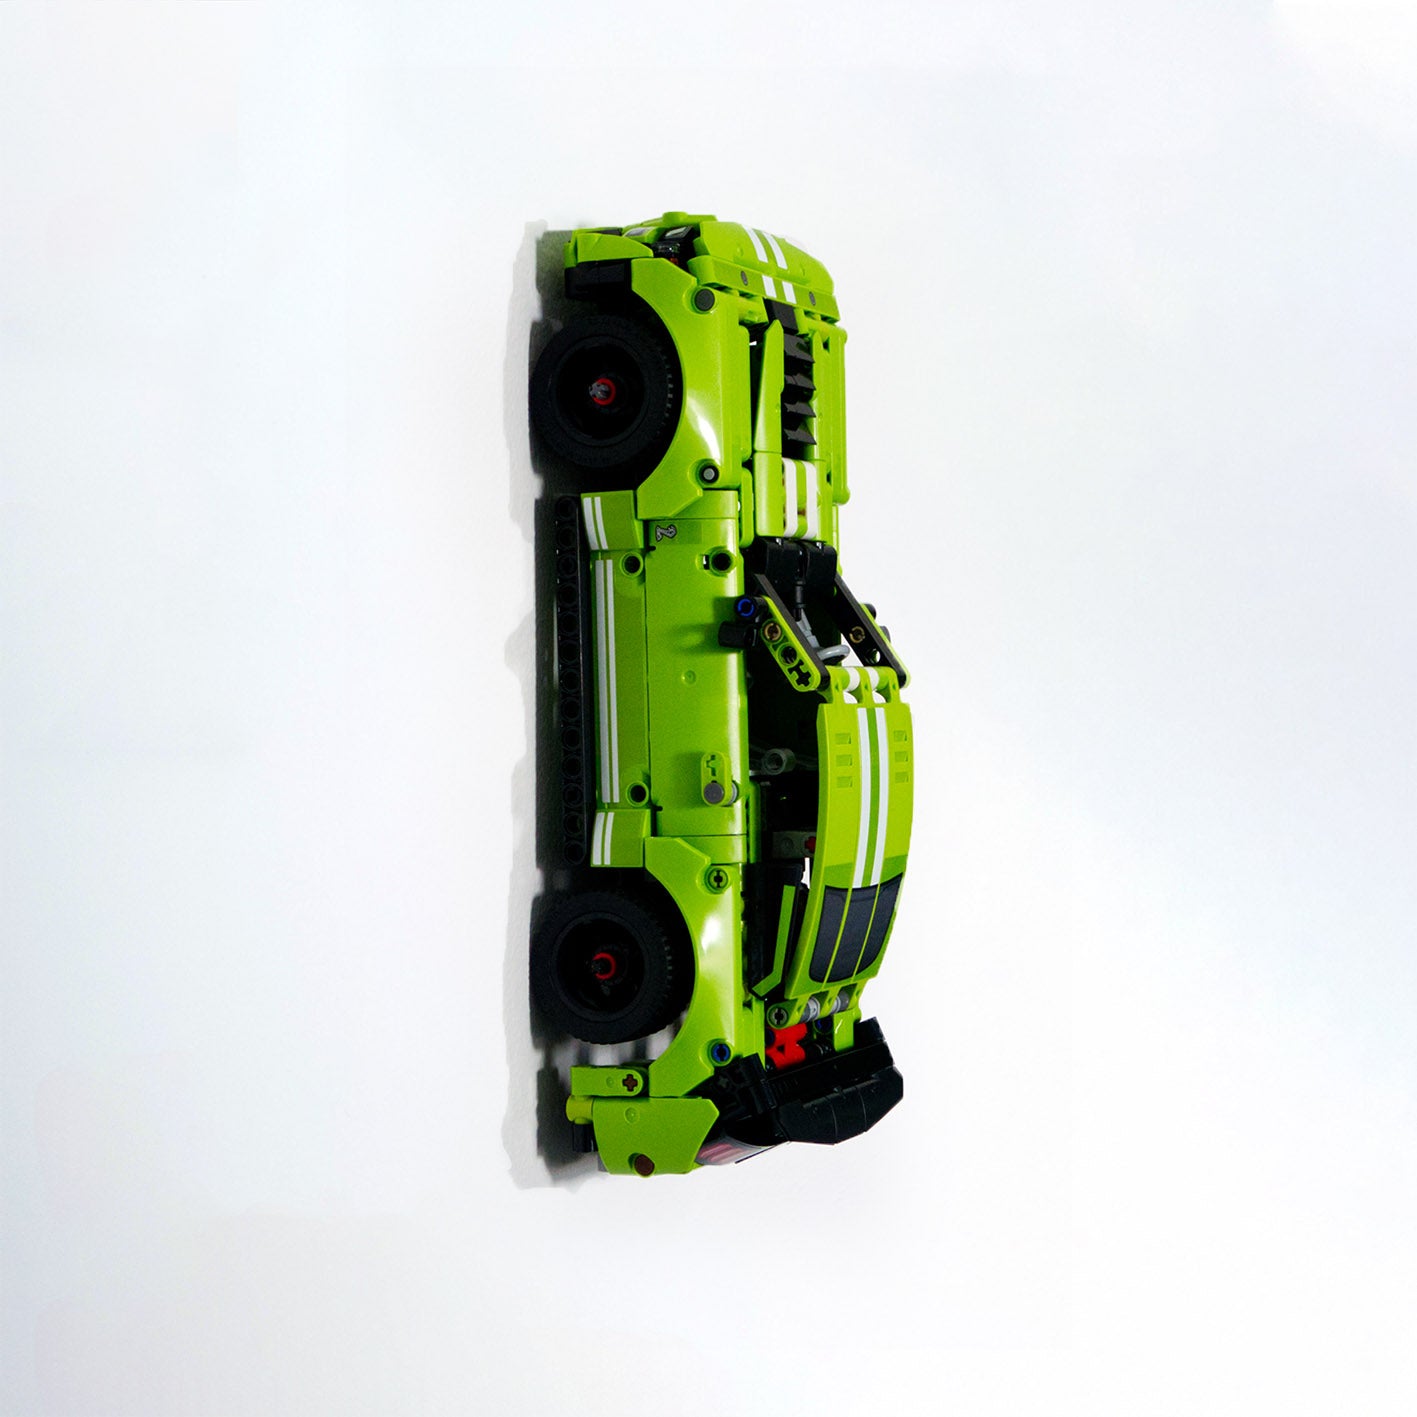 3D Printed Wall Mount 2 in 1 for LEGO FORD MUSTANG SHELBY GT500 42138